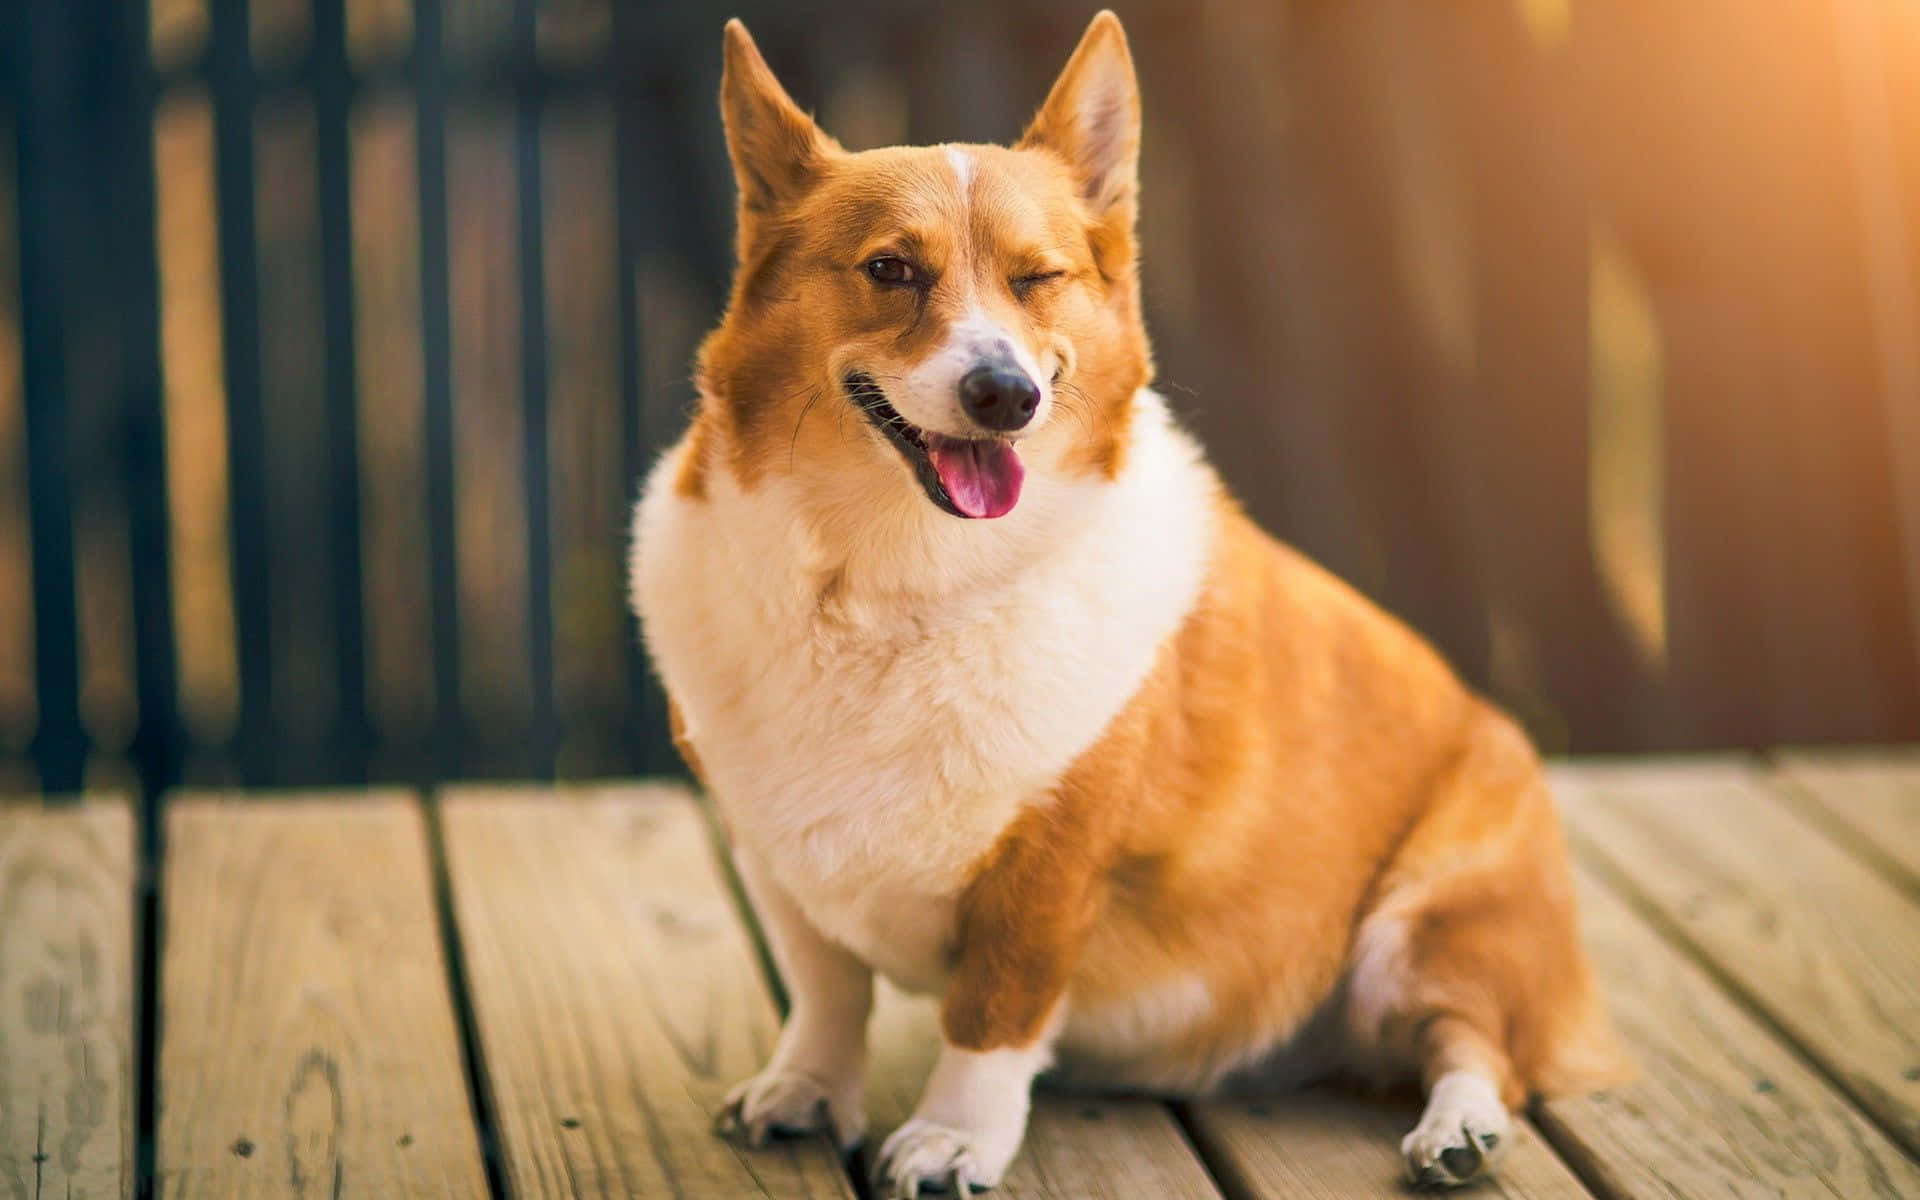 Get Ready To Celebrate! The Cheerful Corgi Is Here To Make Your Day Bright.